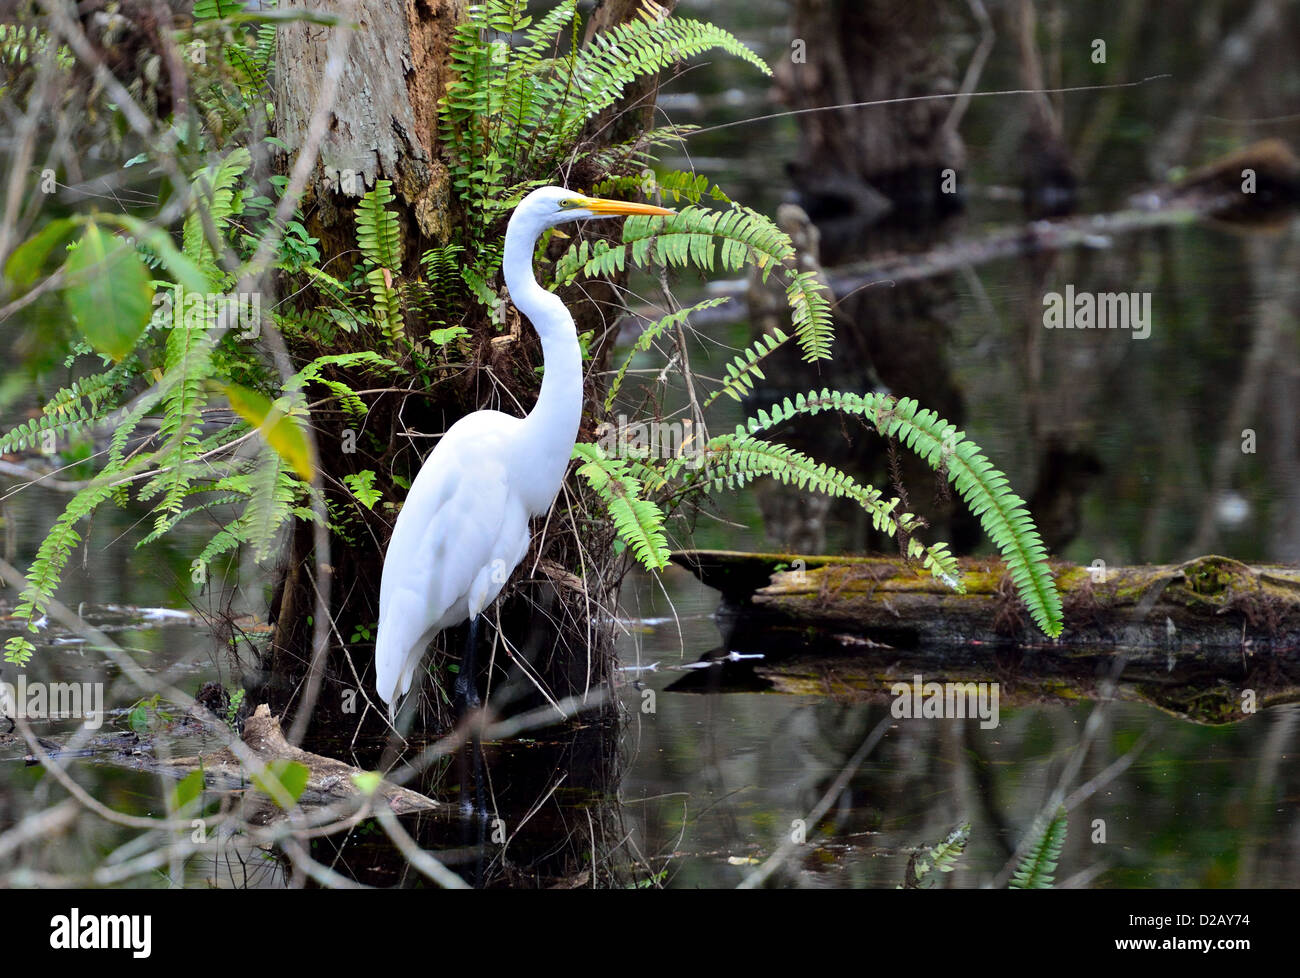 A white great egret in its natural habitat. Big Cypress National Preserve, Florida, USA. Stock Photo